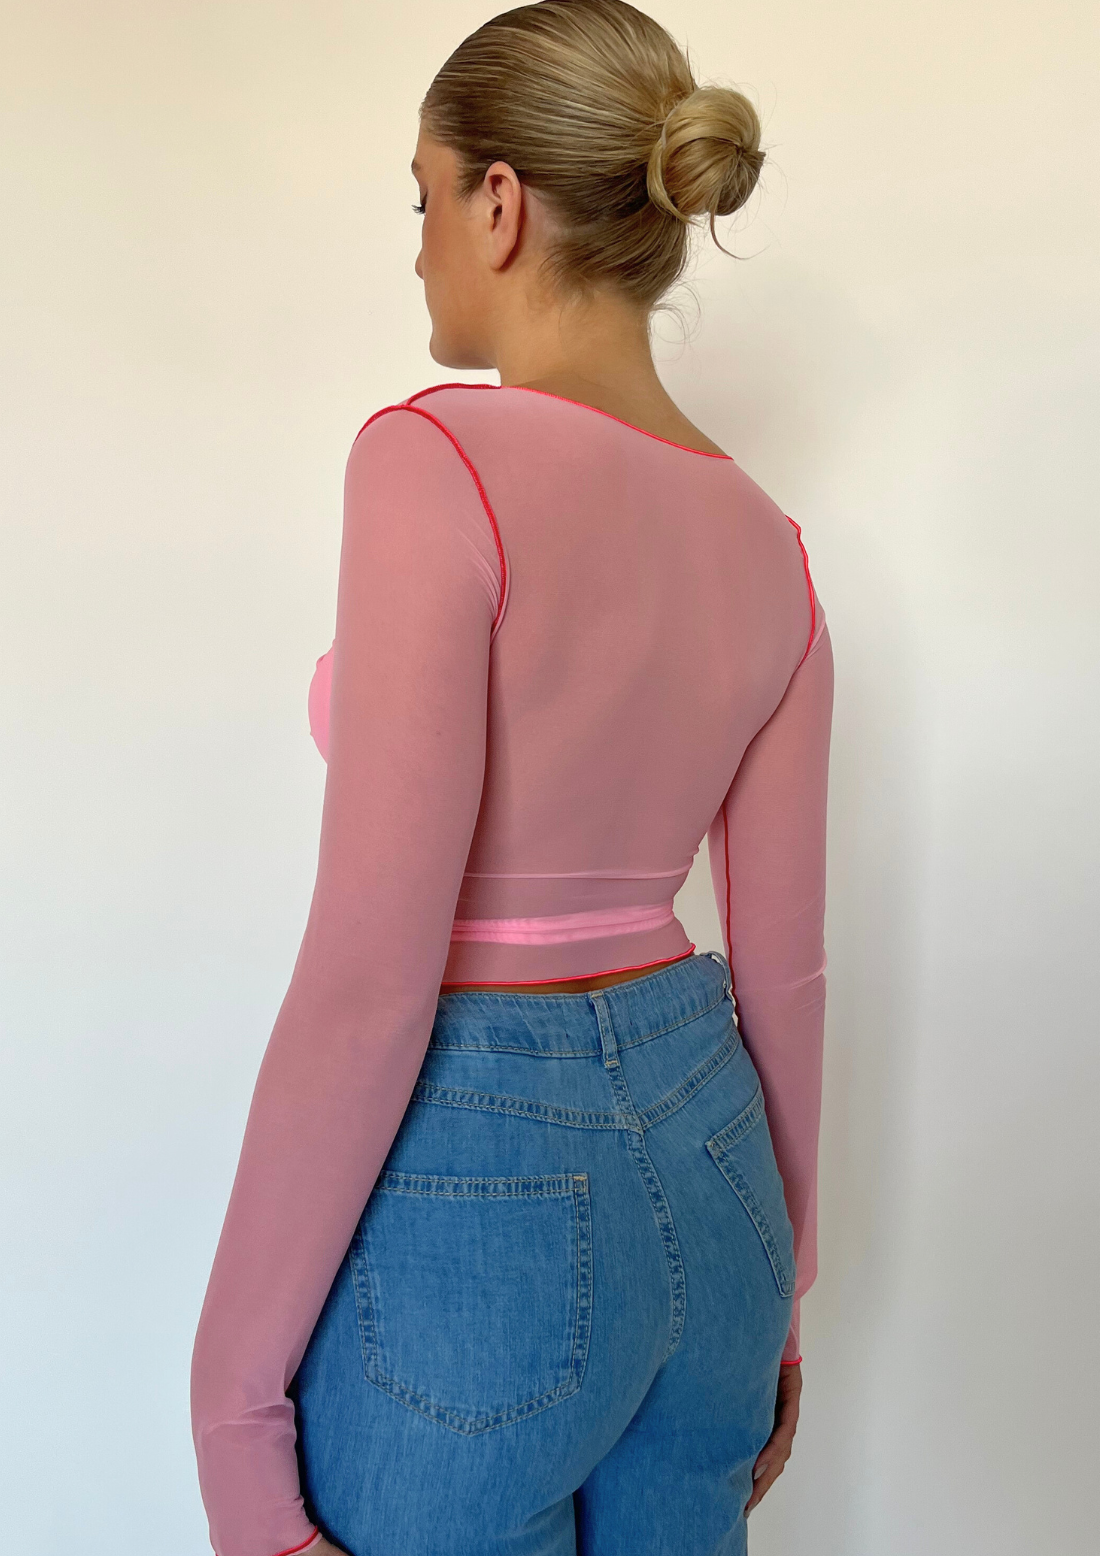 Strawberry Fantasy Top With Lettuce Edge In Pink and Red